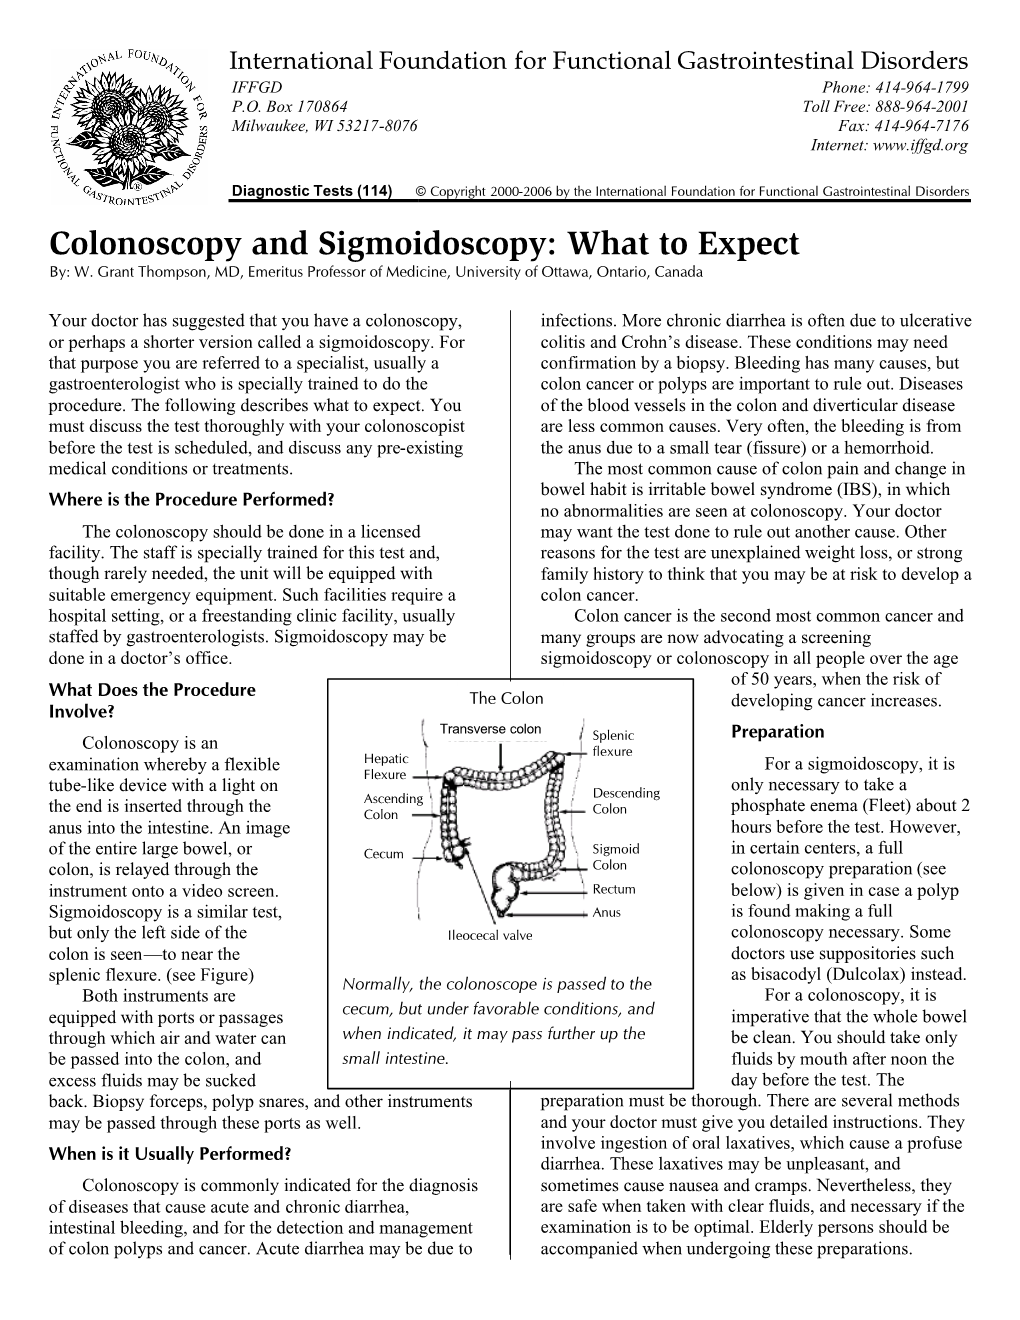 Colonoscopy and Sigmoidoscopy: What to Expect By: W